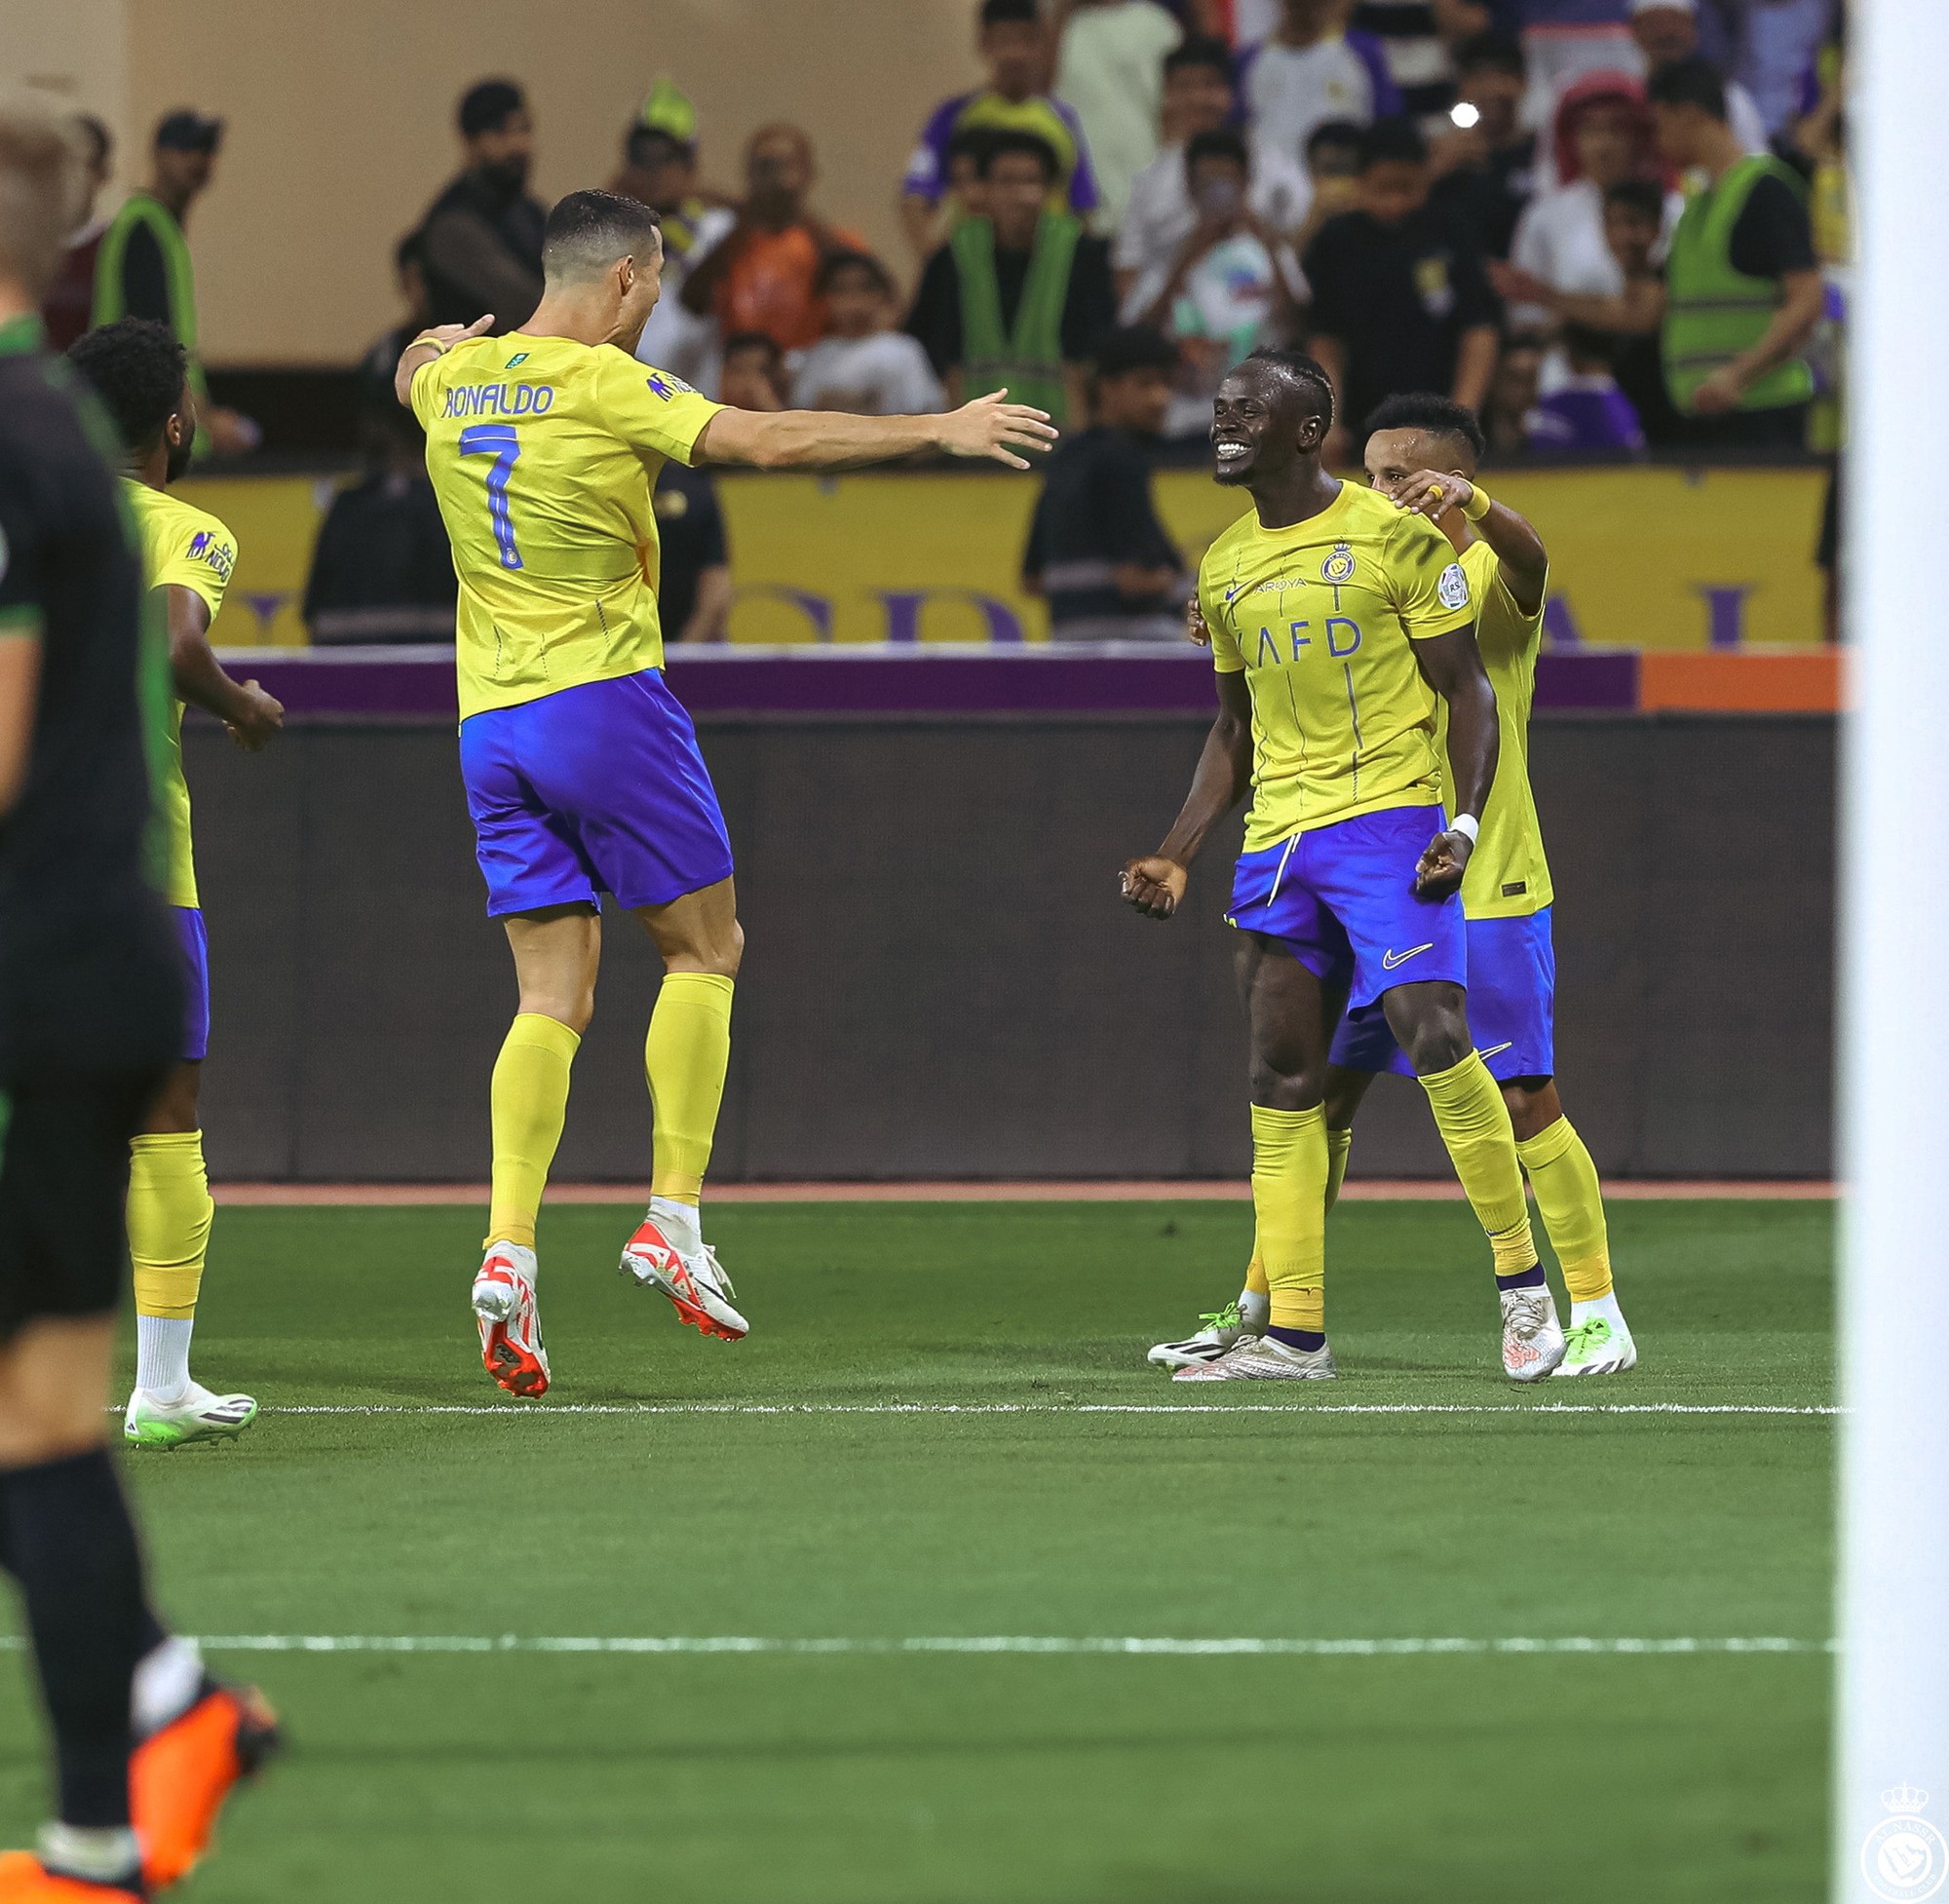 Ronaldo scored the 63rd hat-trick of his career to help Al-Nassr win the start of the season - Photo 3.